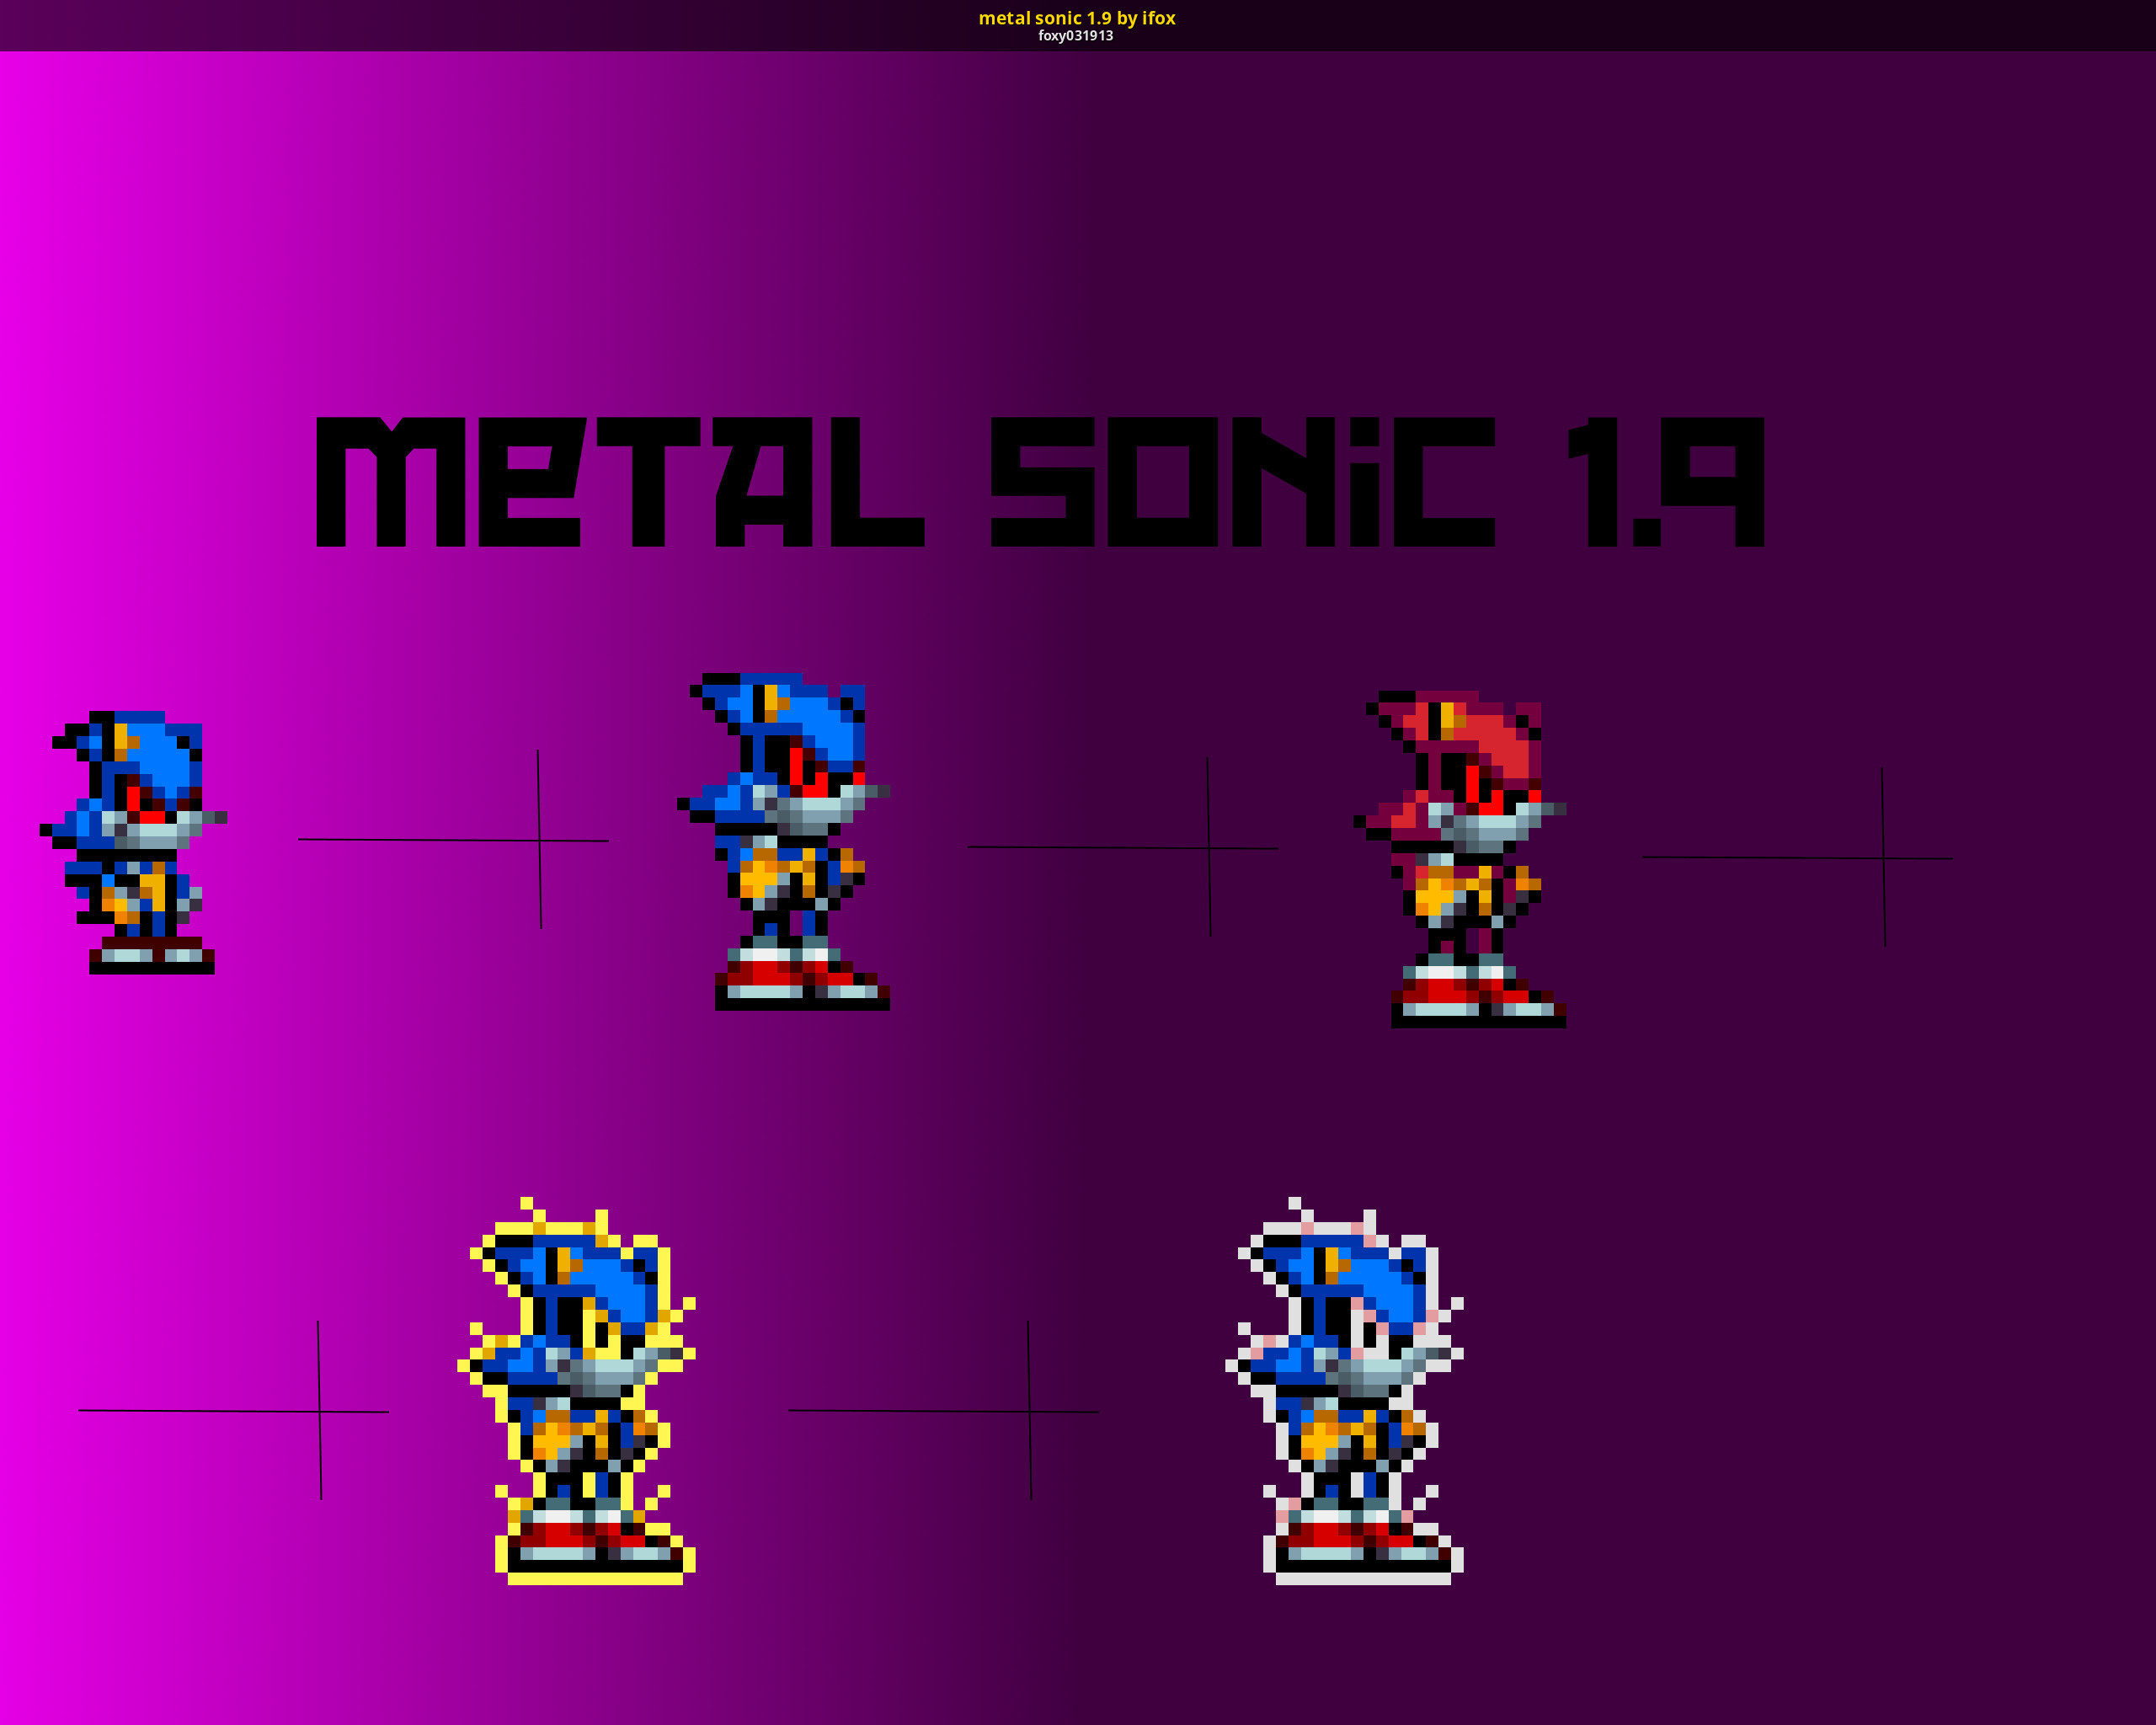 Sonic.exe over Metal Sonic (1.9.1 [Boll Deluxe] [Mods]